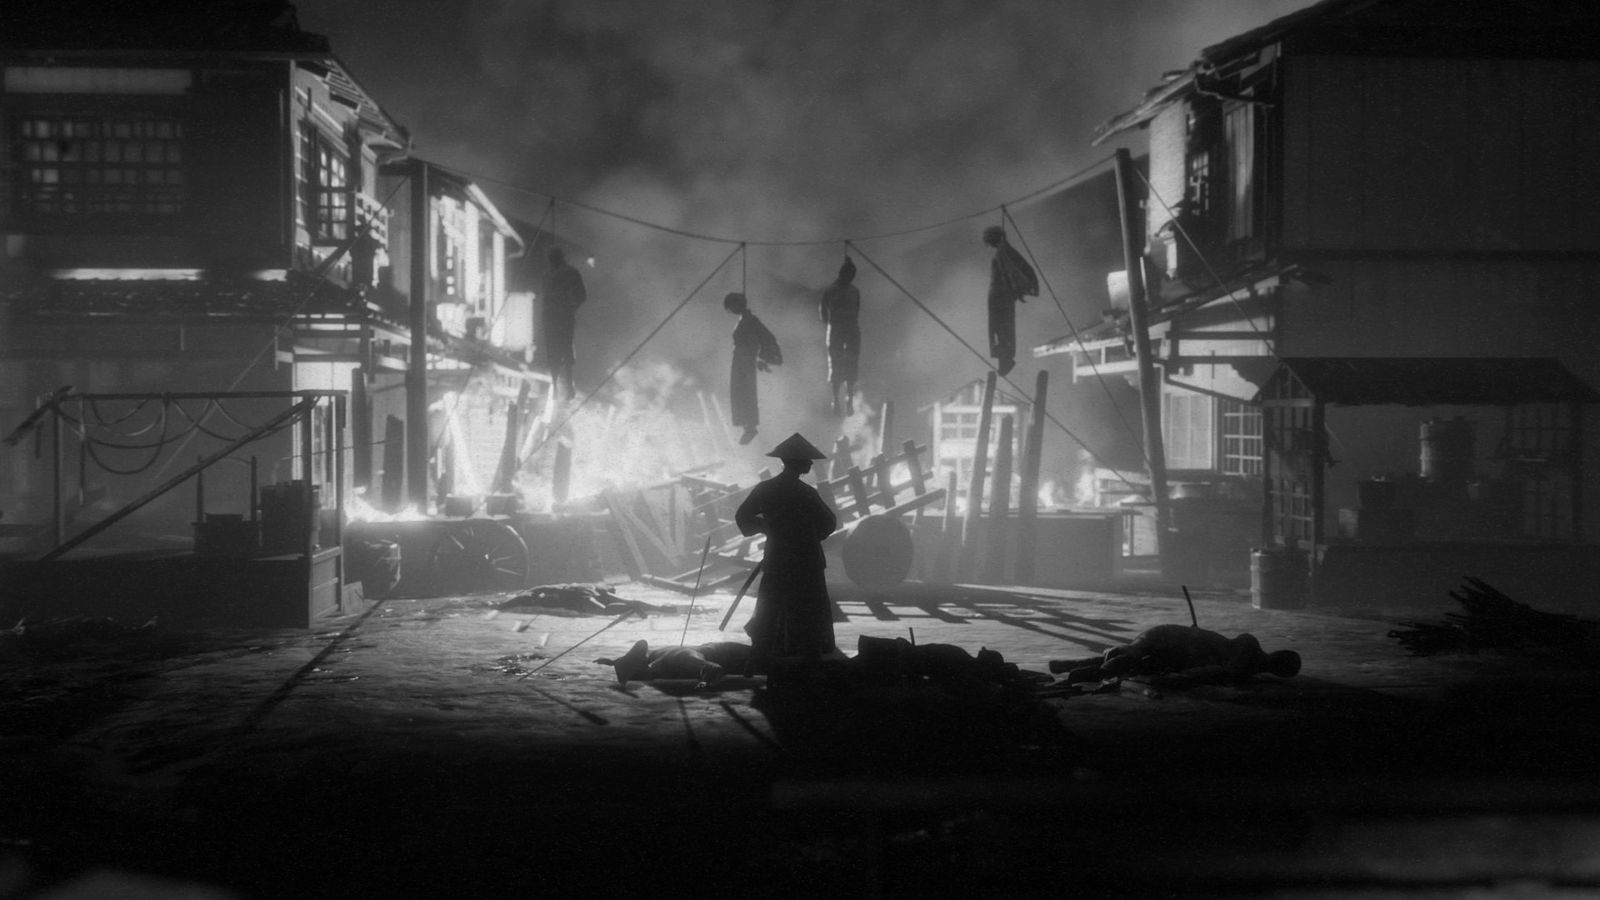 A samurai standing in a burning town with bodies hanging from a rope in the background.